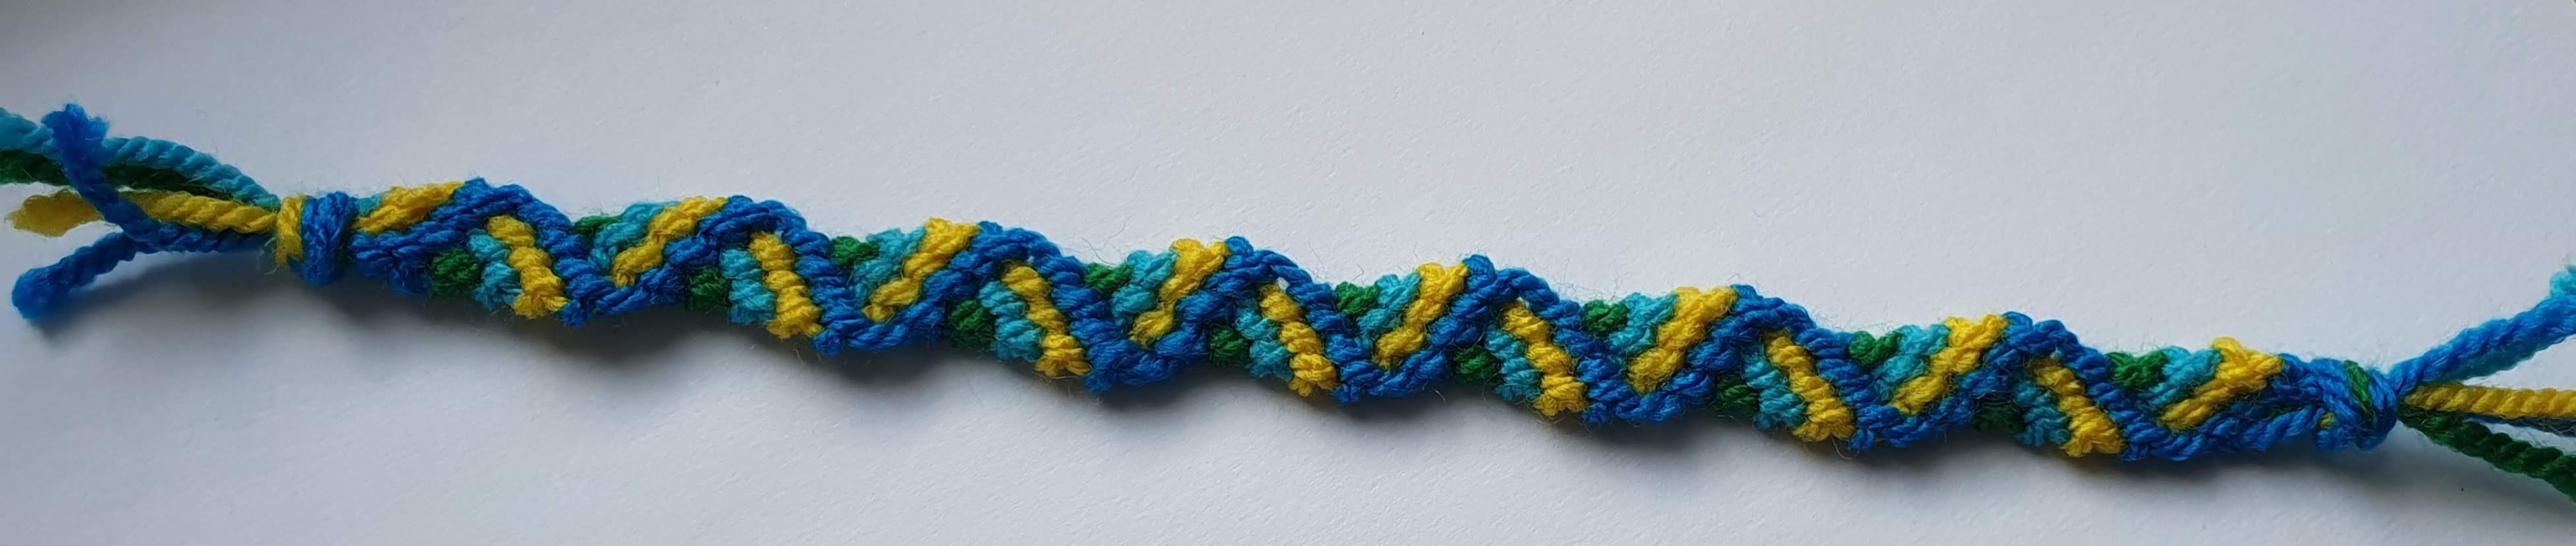 Bracelet with coloured zigzags, looking like a folded ribbon